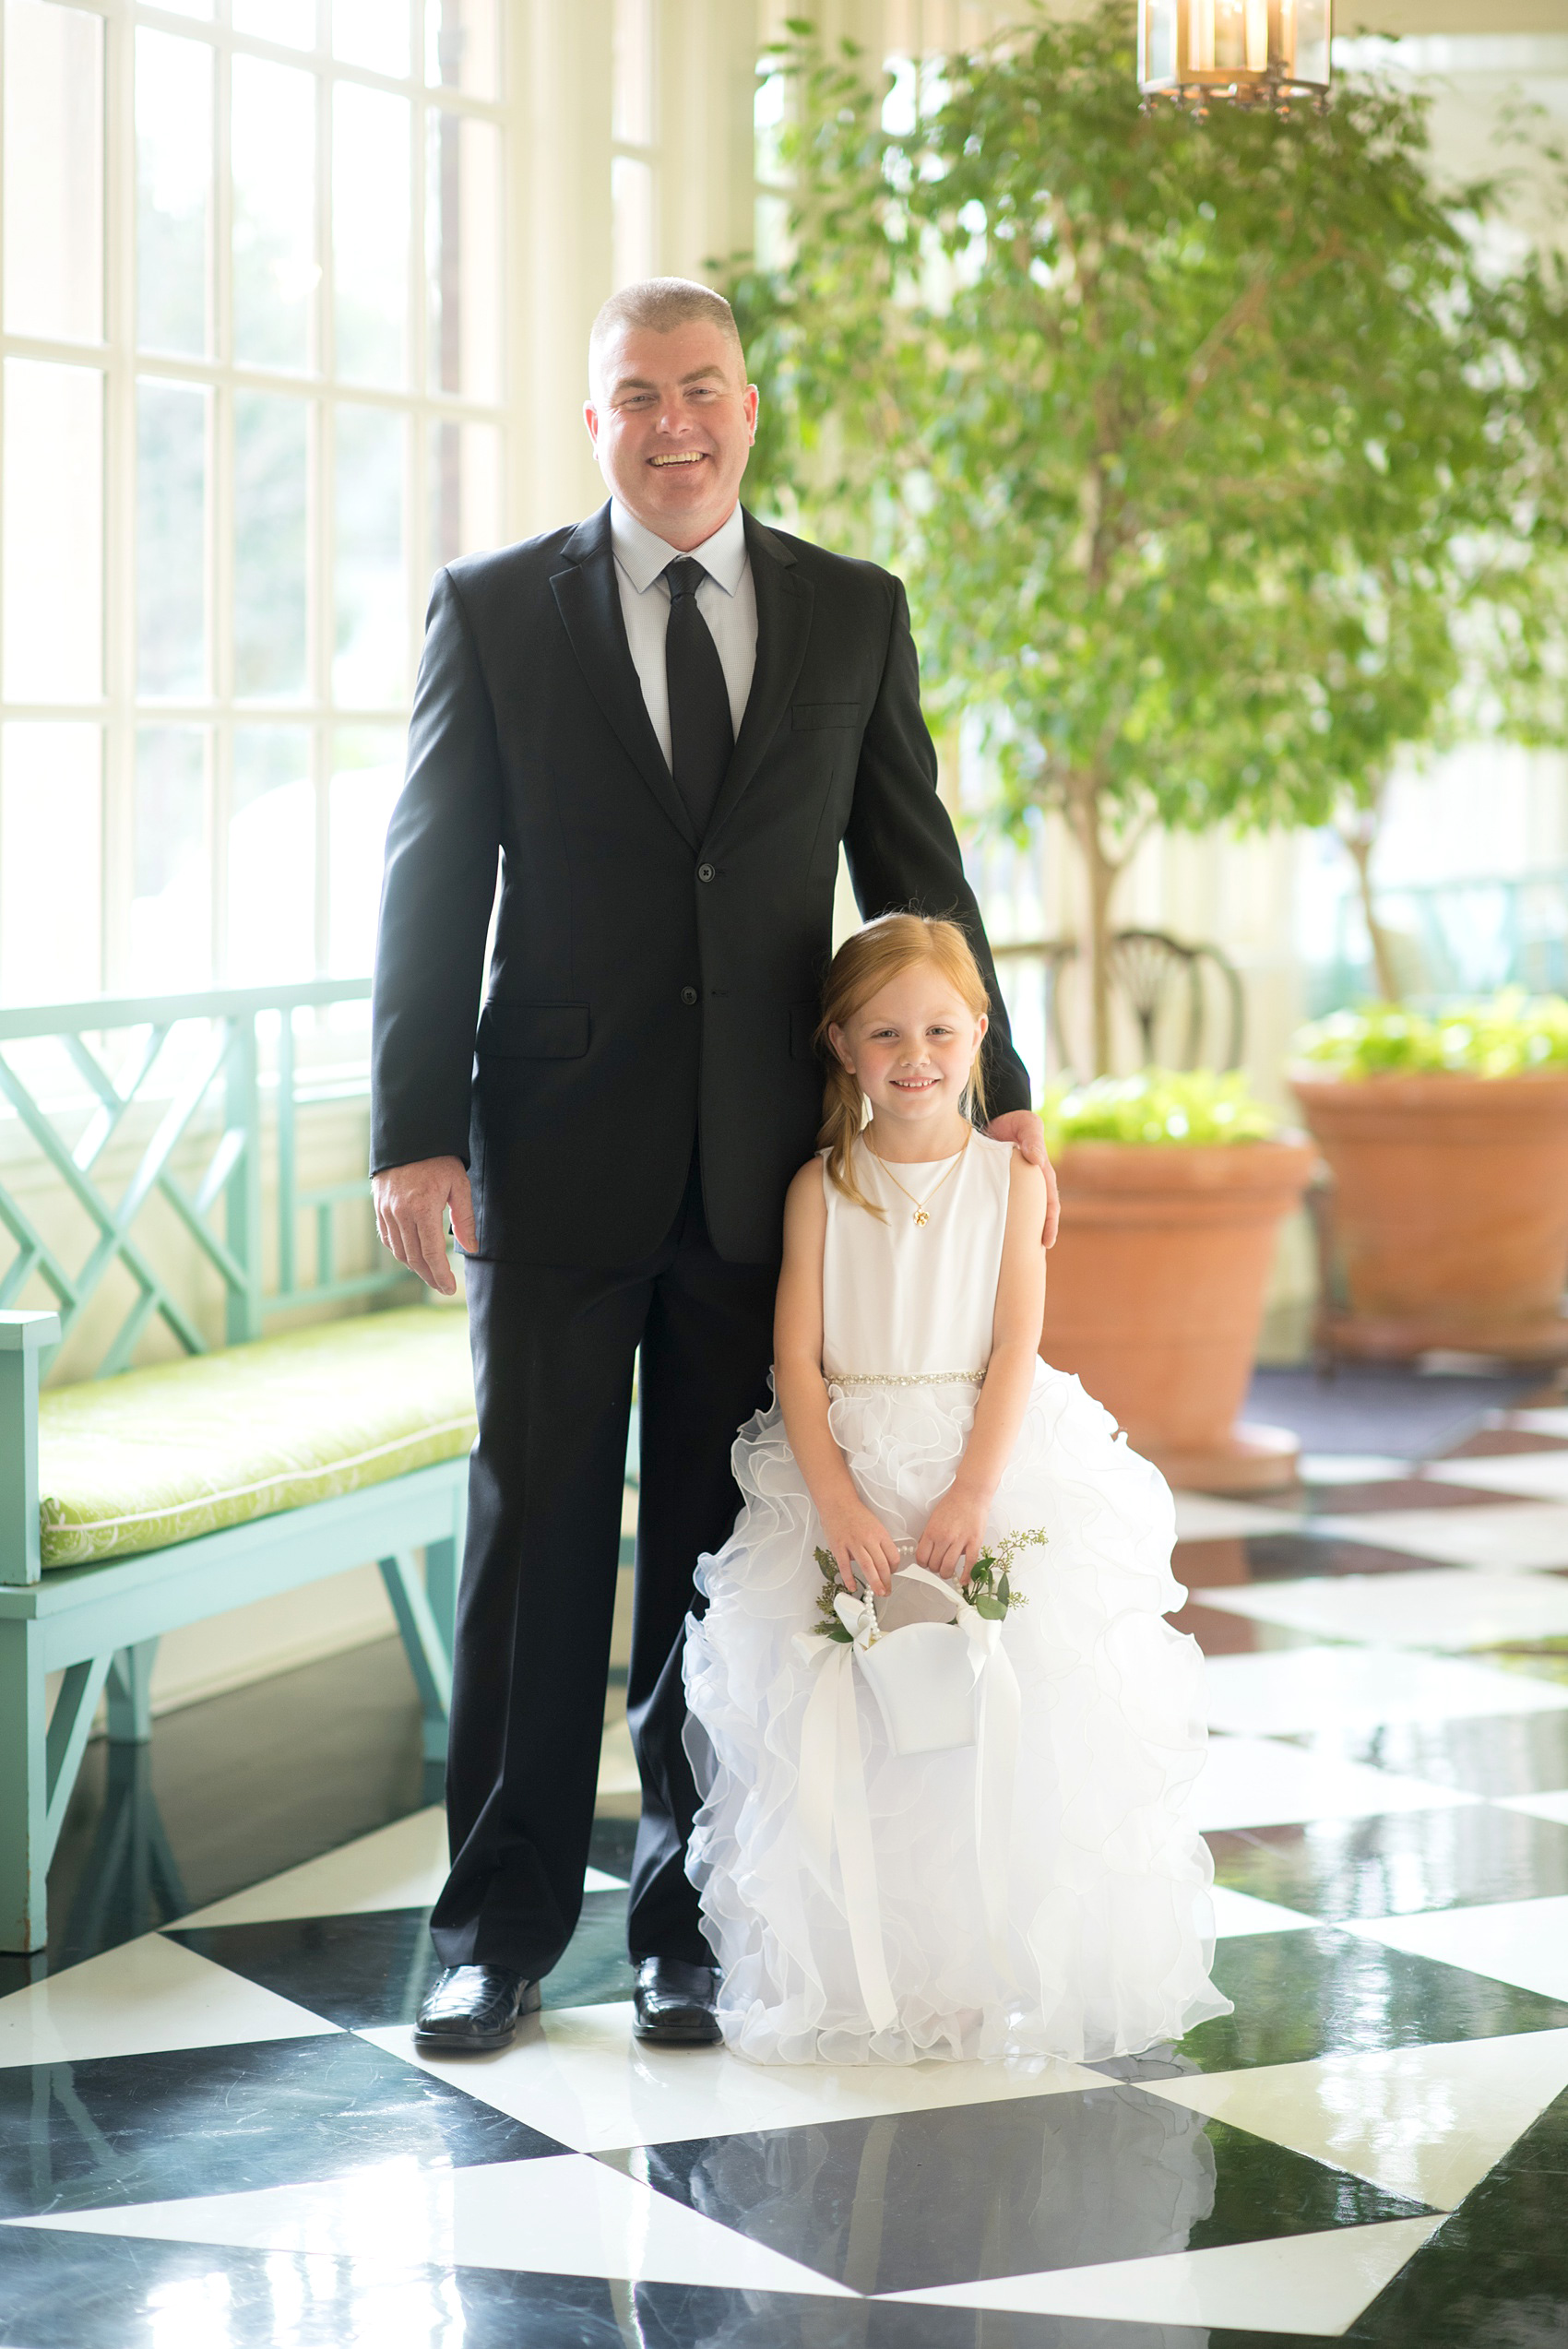 Photos of a fall wedding at The Carolina Inn, in Chapel Hill North Carolina, by Mikkel Paige Photography. This event venue doubles as a hotel for guests, who can enjoy a reception indoors or outdoors. This is the cutest photos of the flower girl and her dad! Click through to see inspiration from the entire wedding! Planner: @asouthernsoiree #thecarolinainn #ChapelHillWeddings #MikkelPaige #ASouthernSoiree #flowergirl